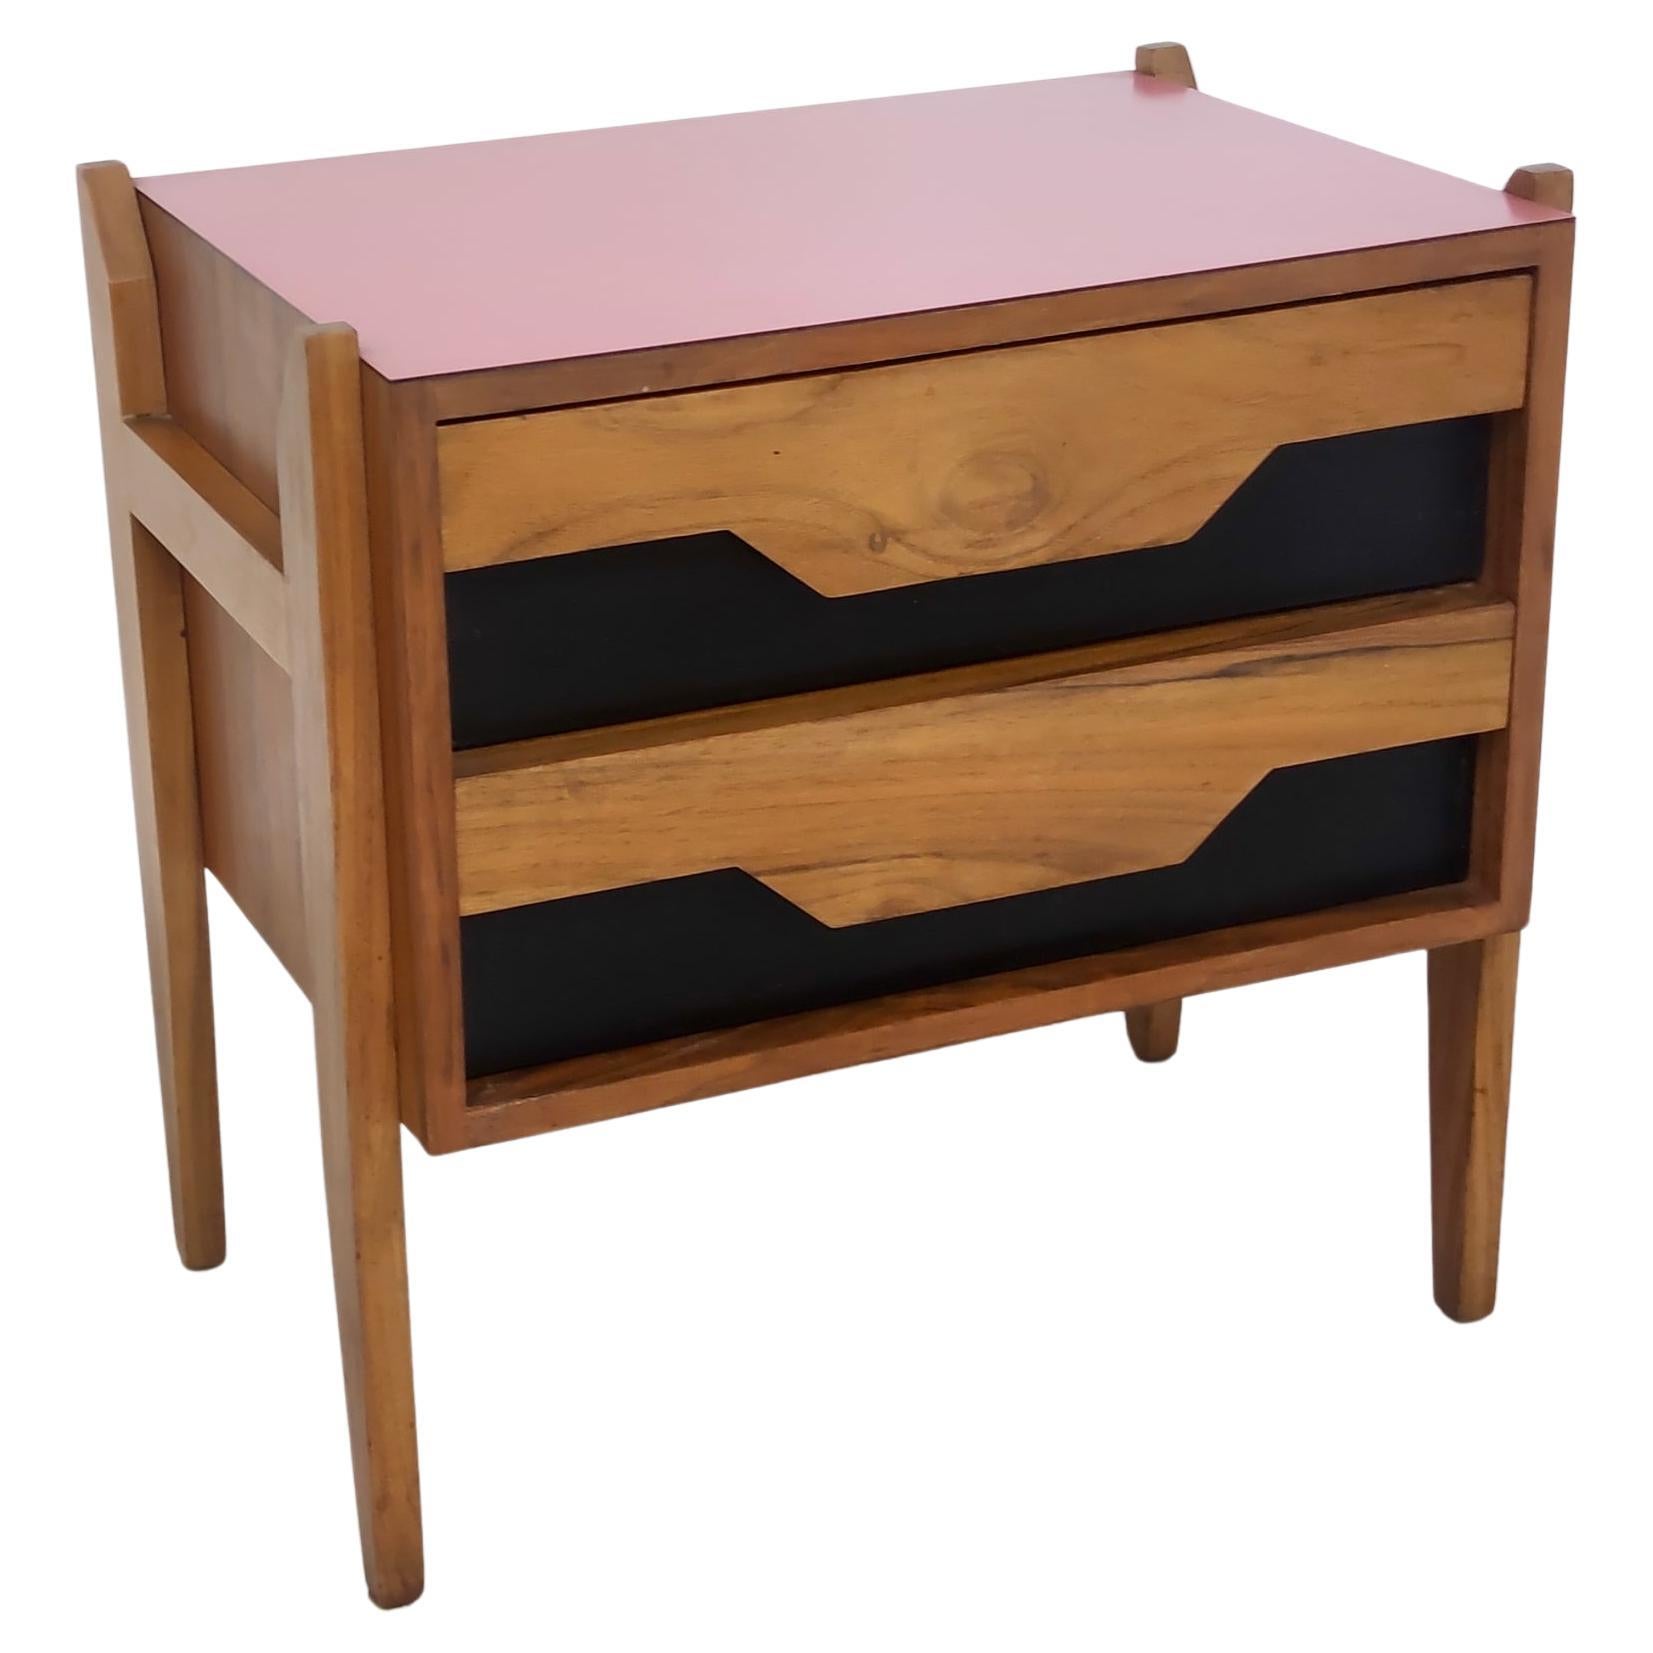 Vintage Walnut Nightstand attr. to Ico Parisi with a Pink Top and Black Drawers